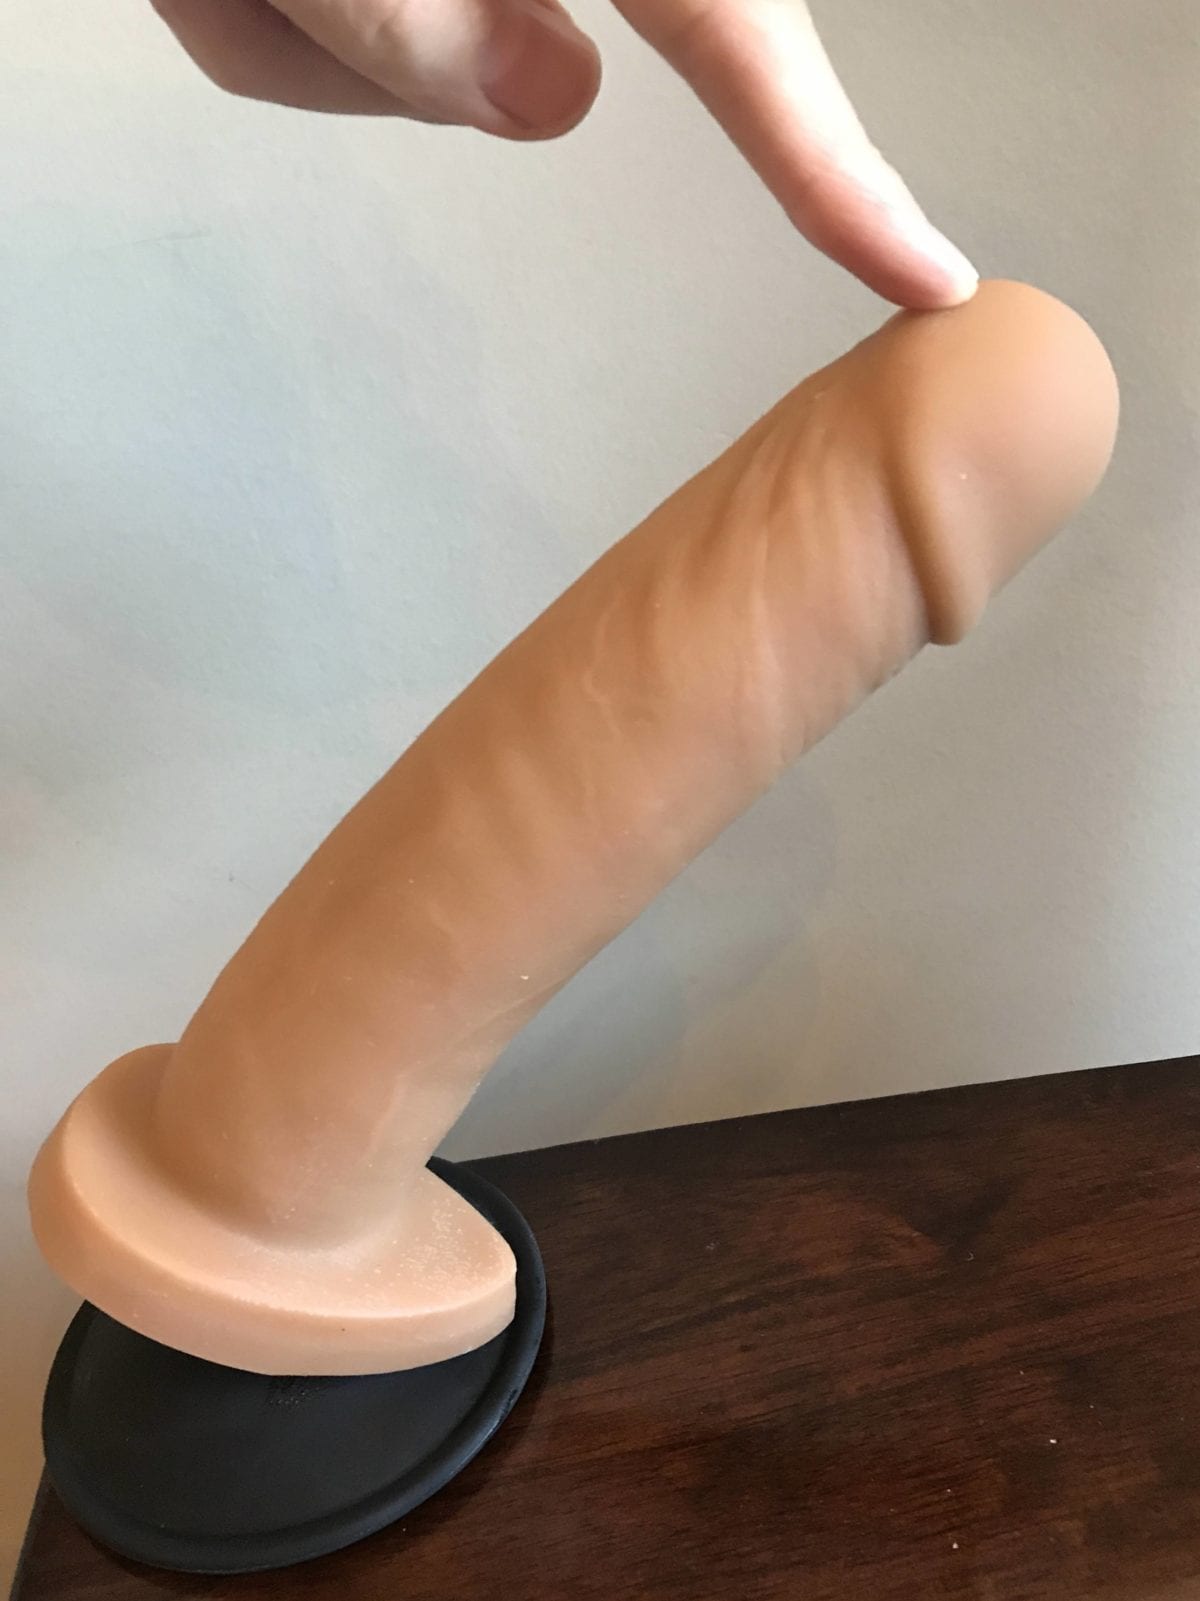 bends forward well with the Tantus suction cup inside. 